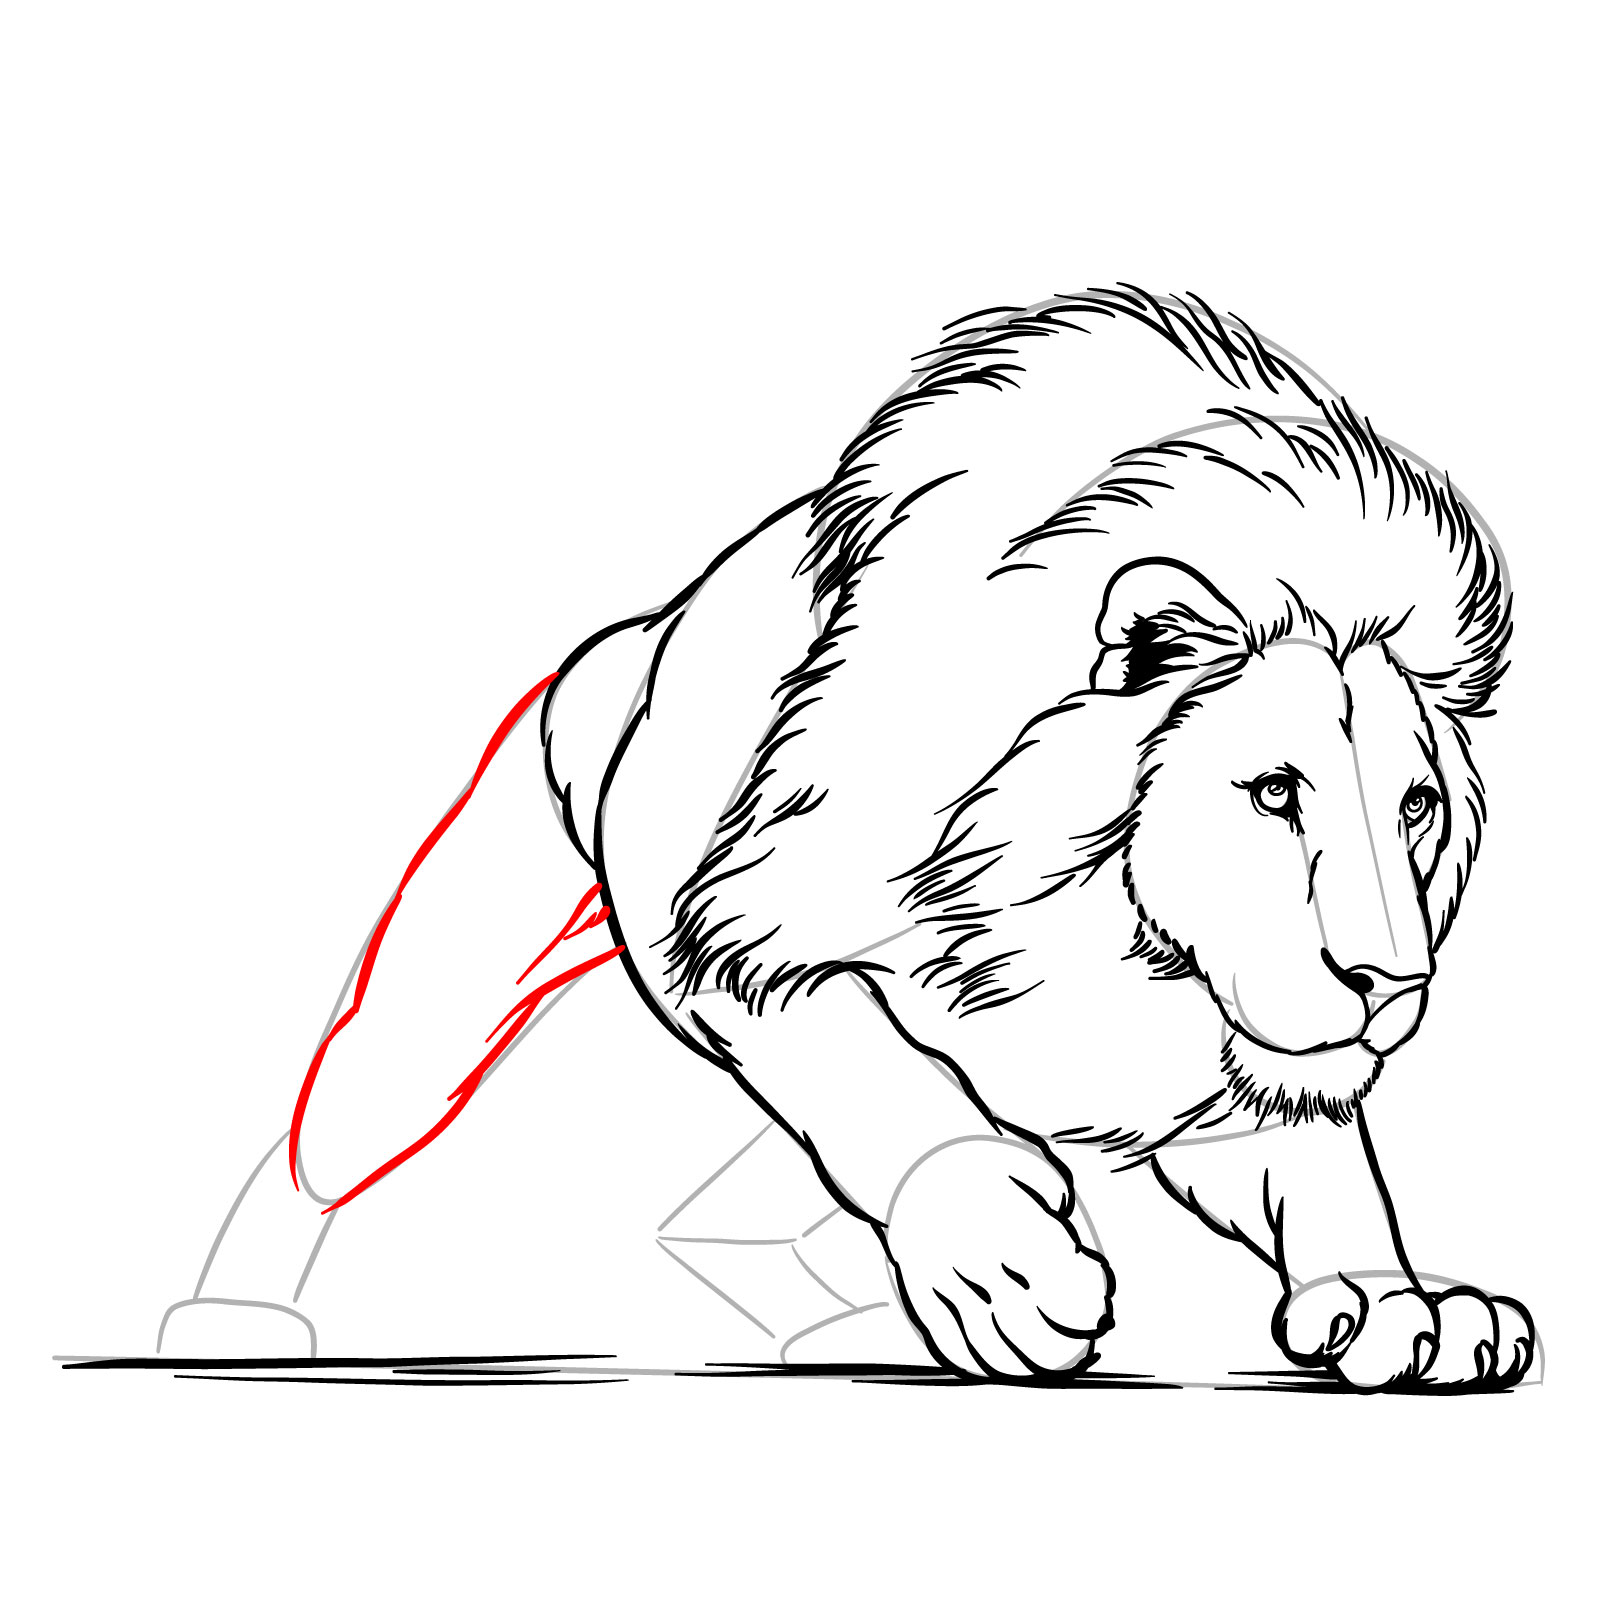 How to draw a hunting lion - Step 15: Sketching the first rear leg